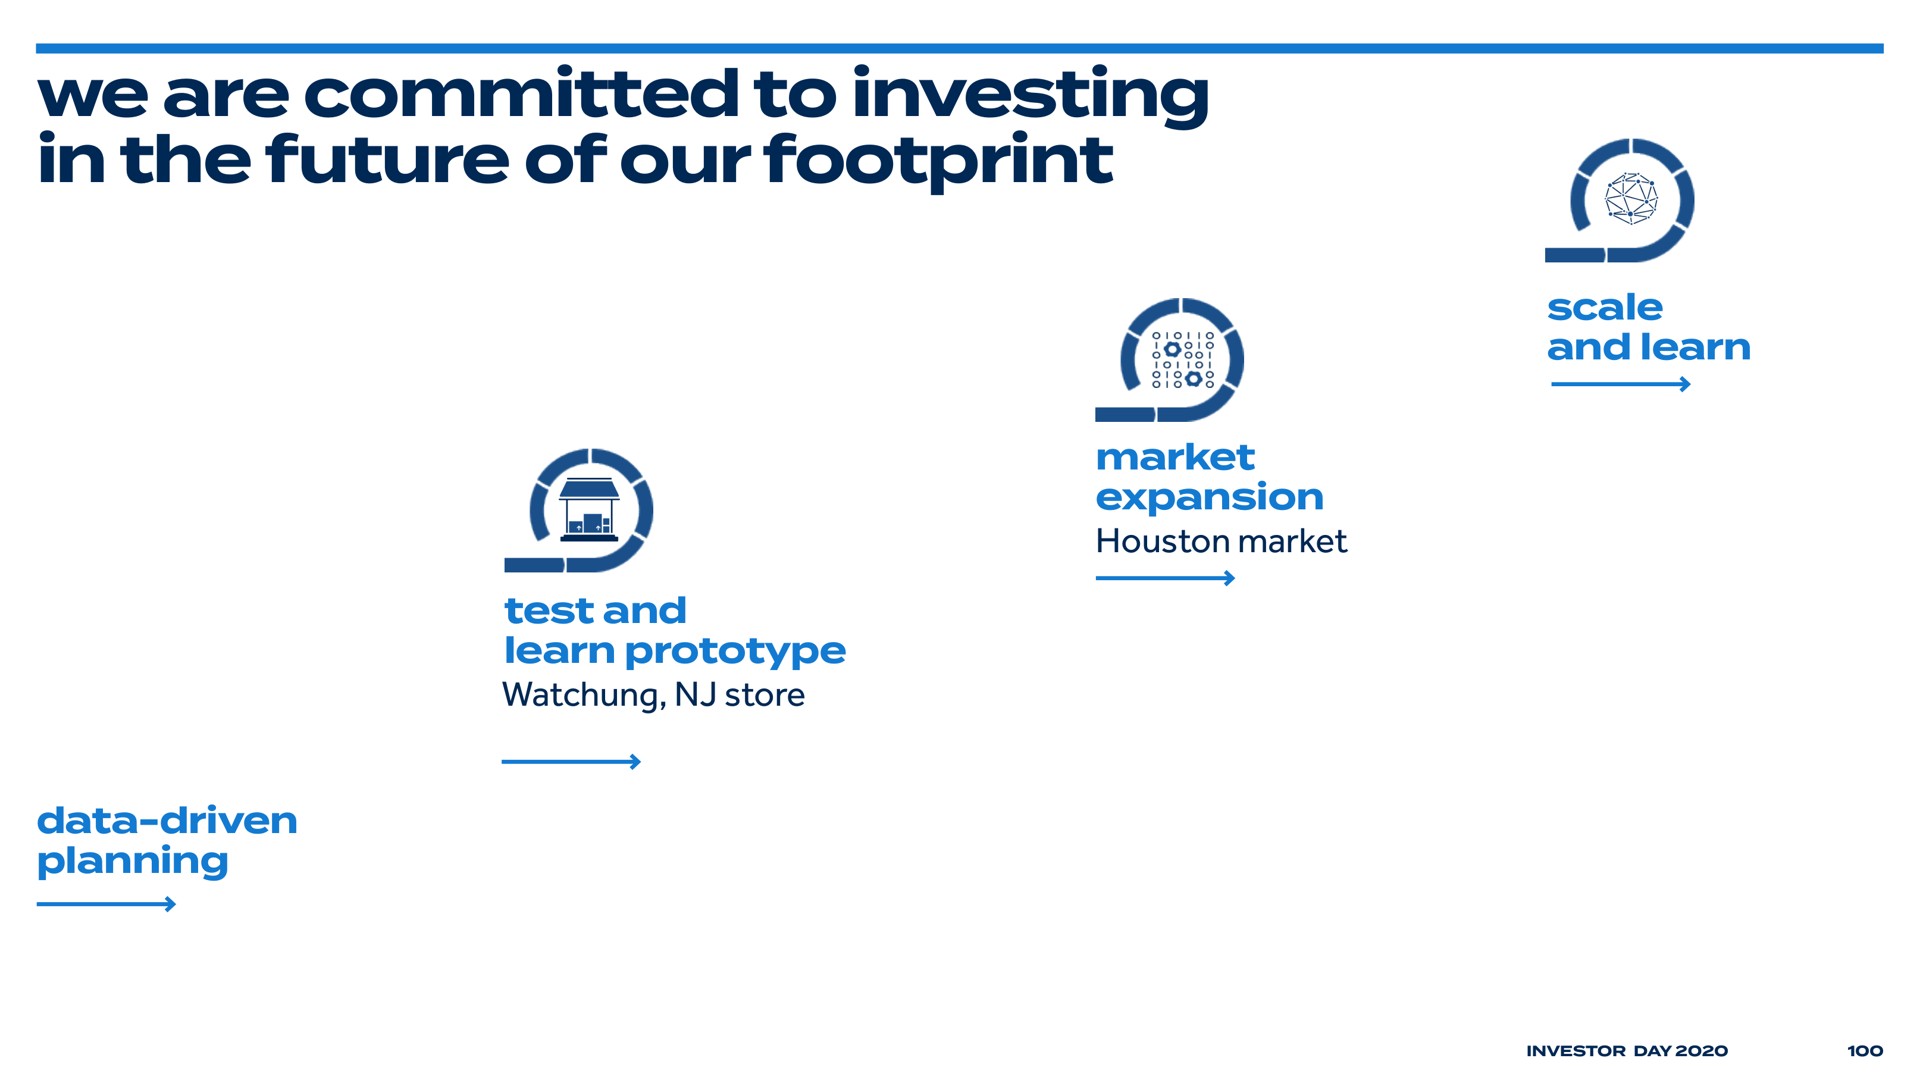 we are committed to investing in the future of our footprint | Bed Bath & Beyond